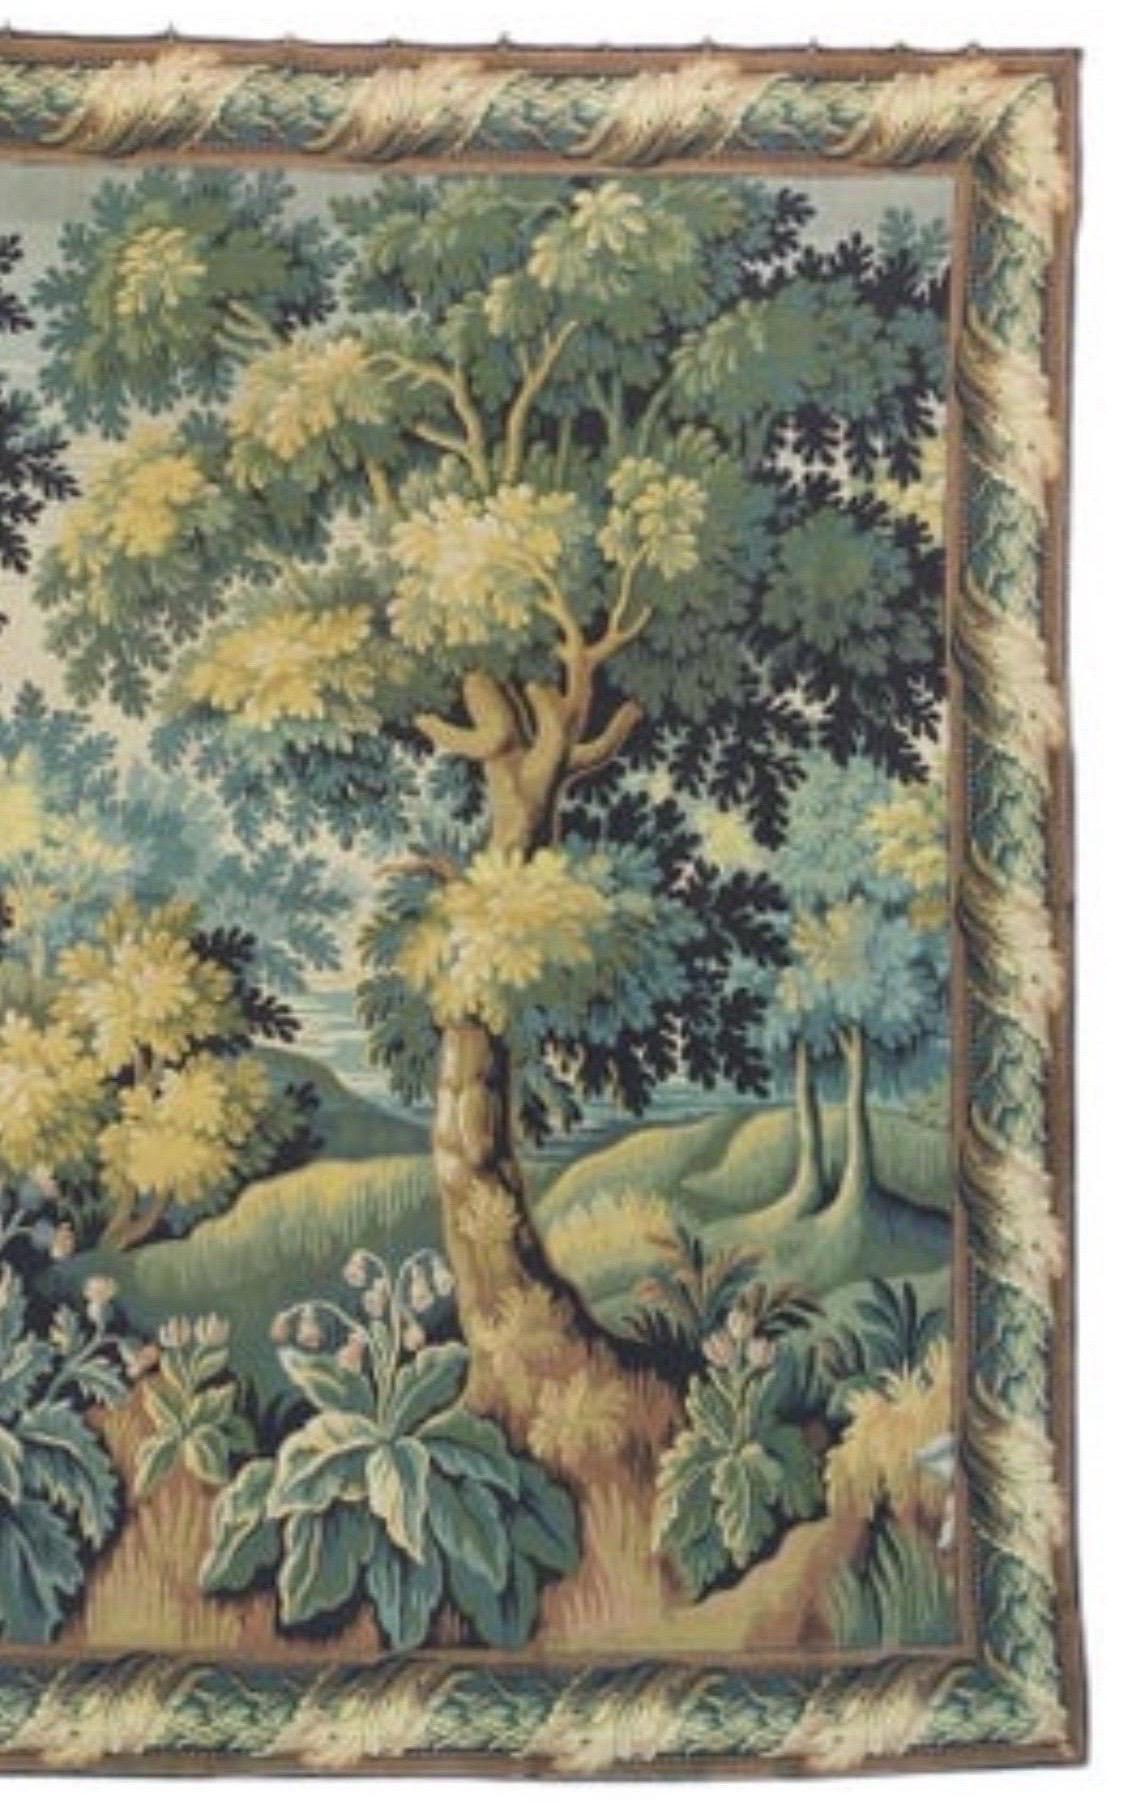 Hand-Woven Large Vintage French Verdure Style Landscape Tapestry For Sale